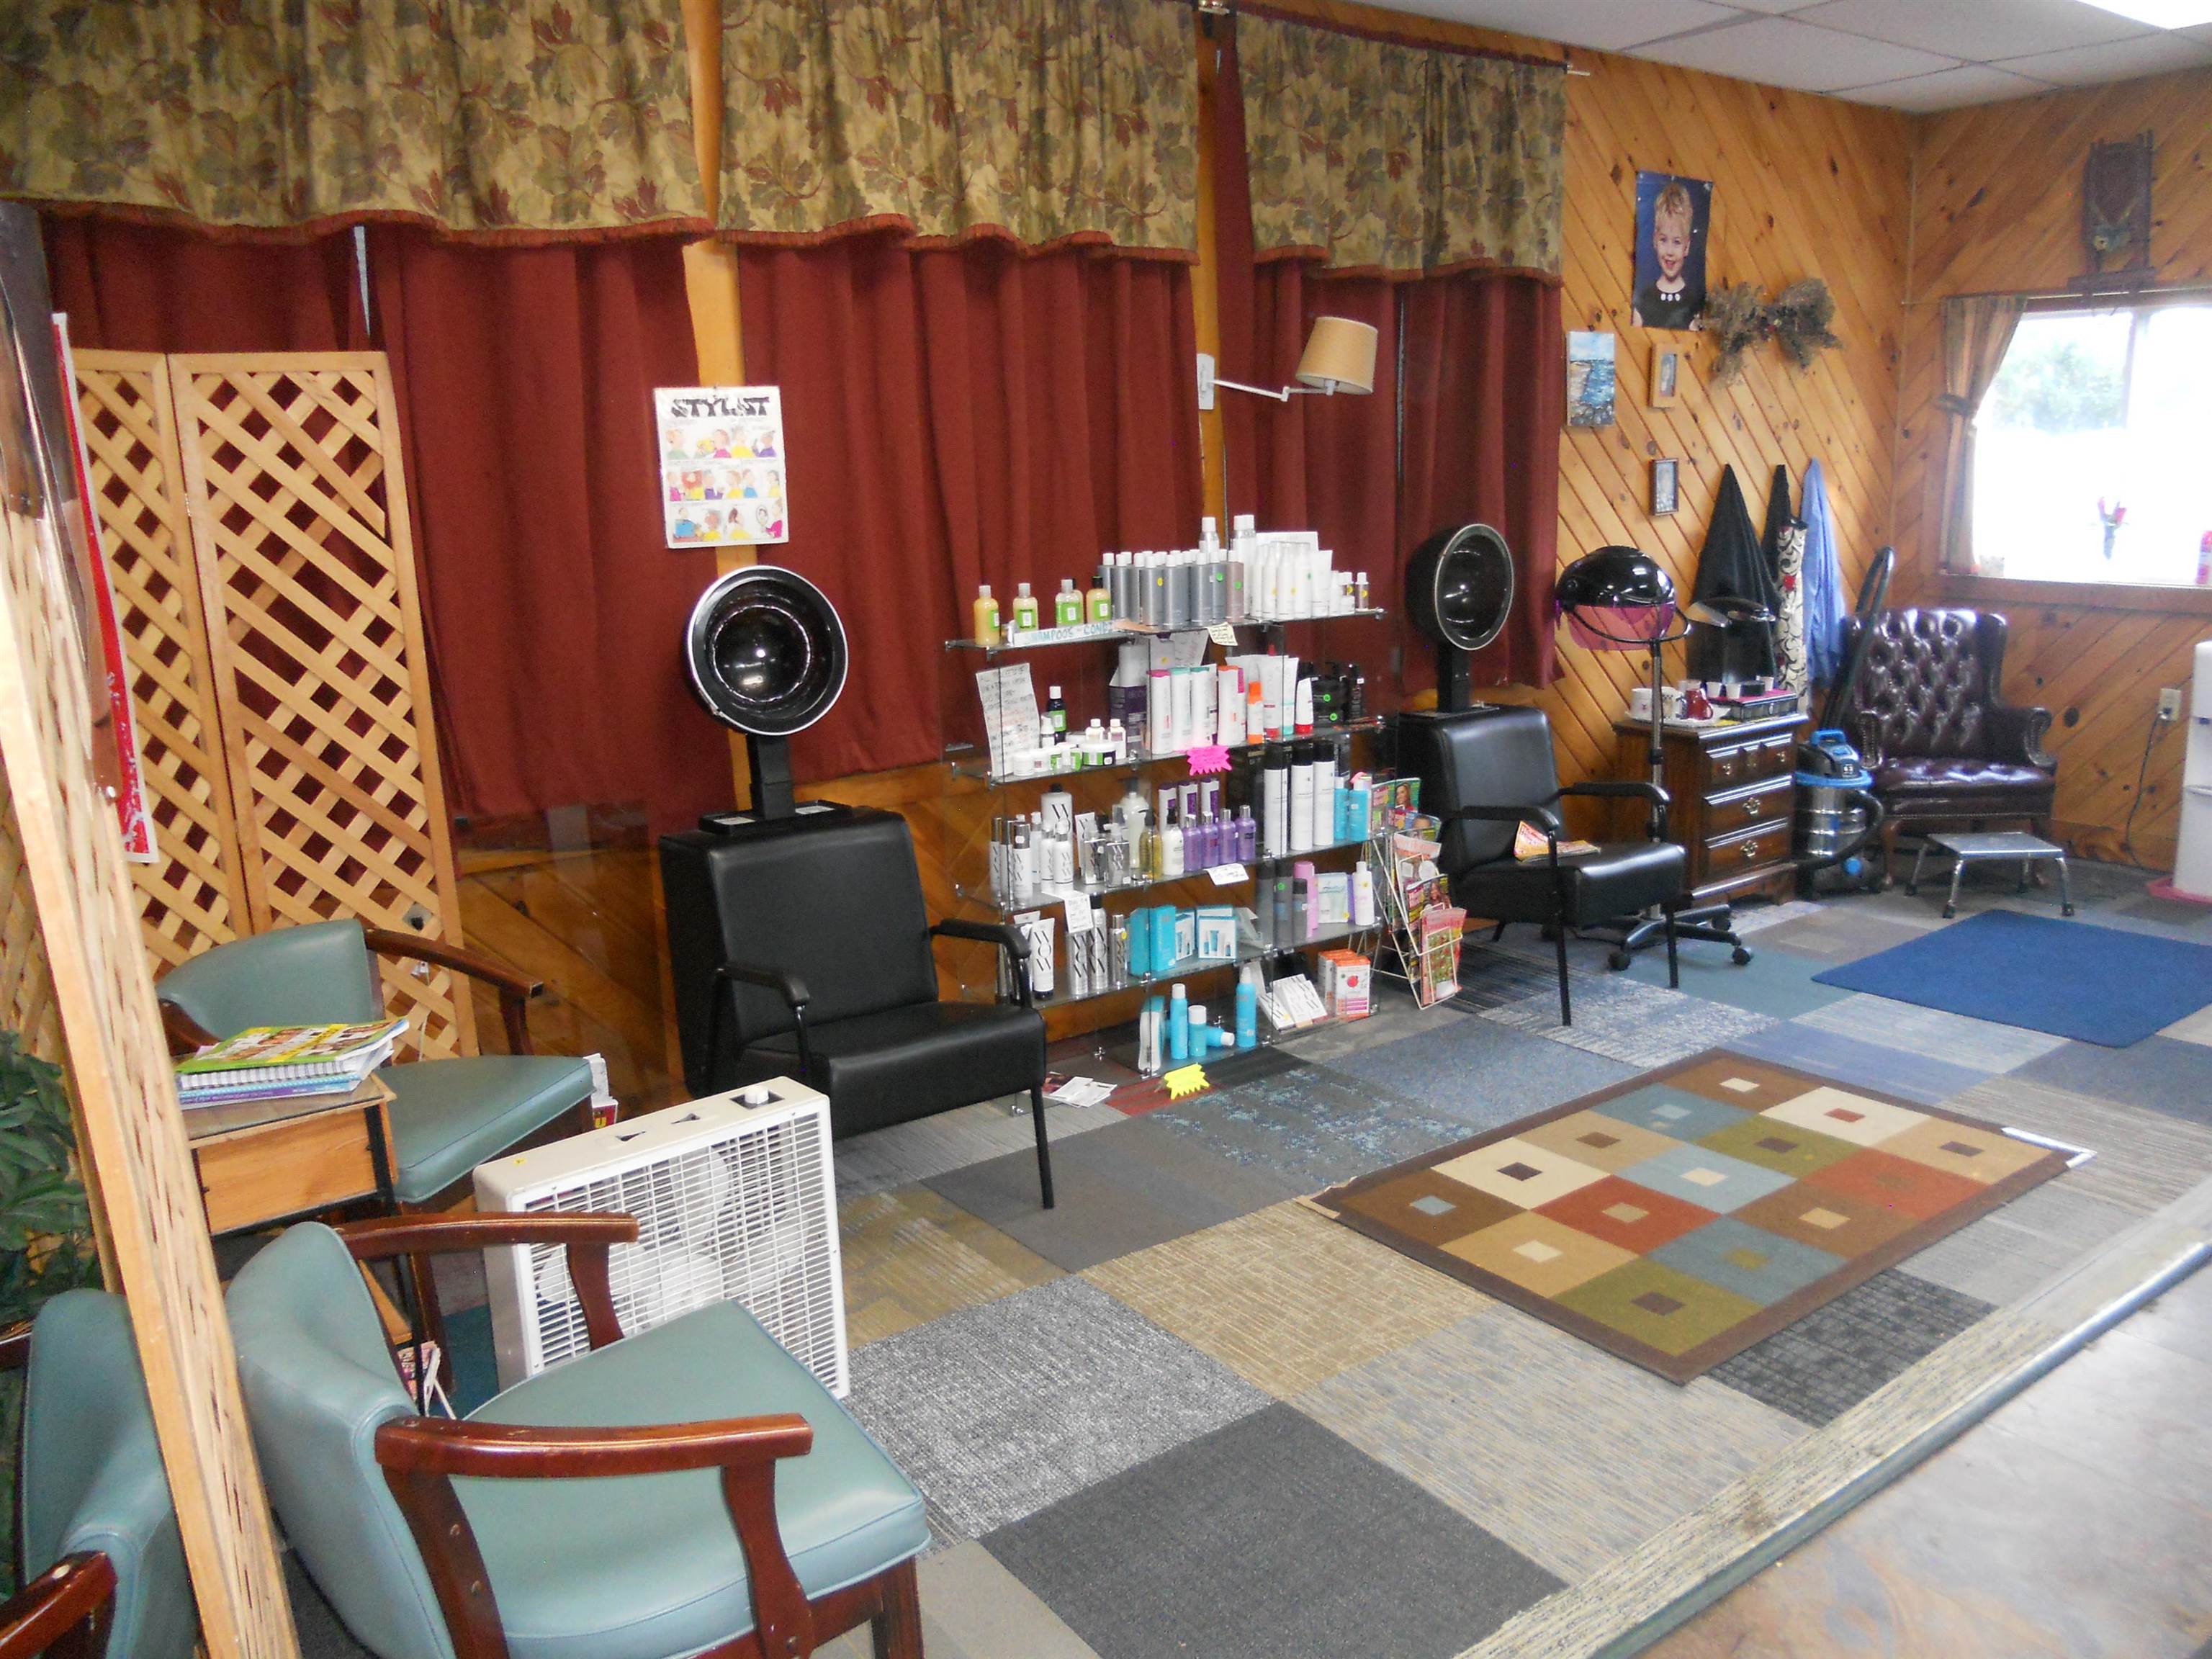 Right Side of Salon Space